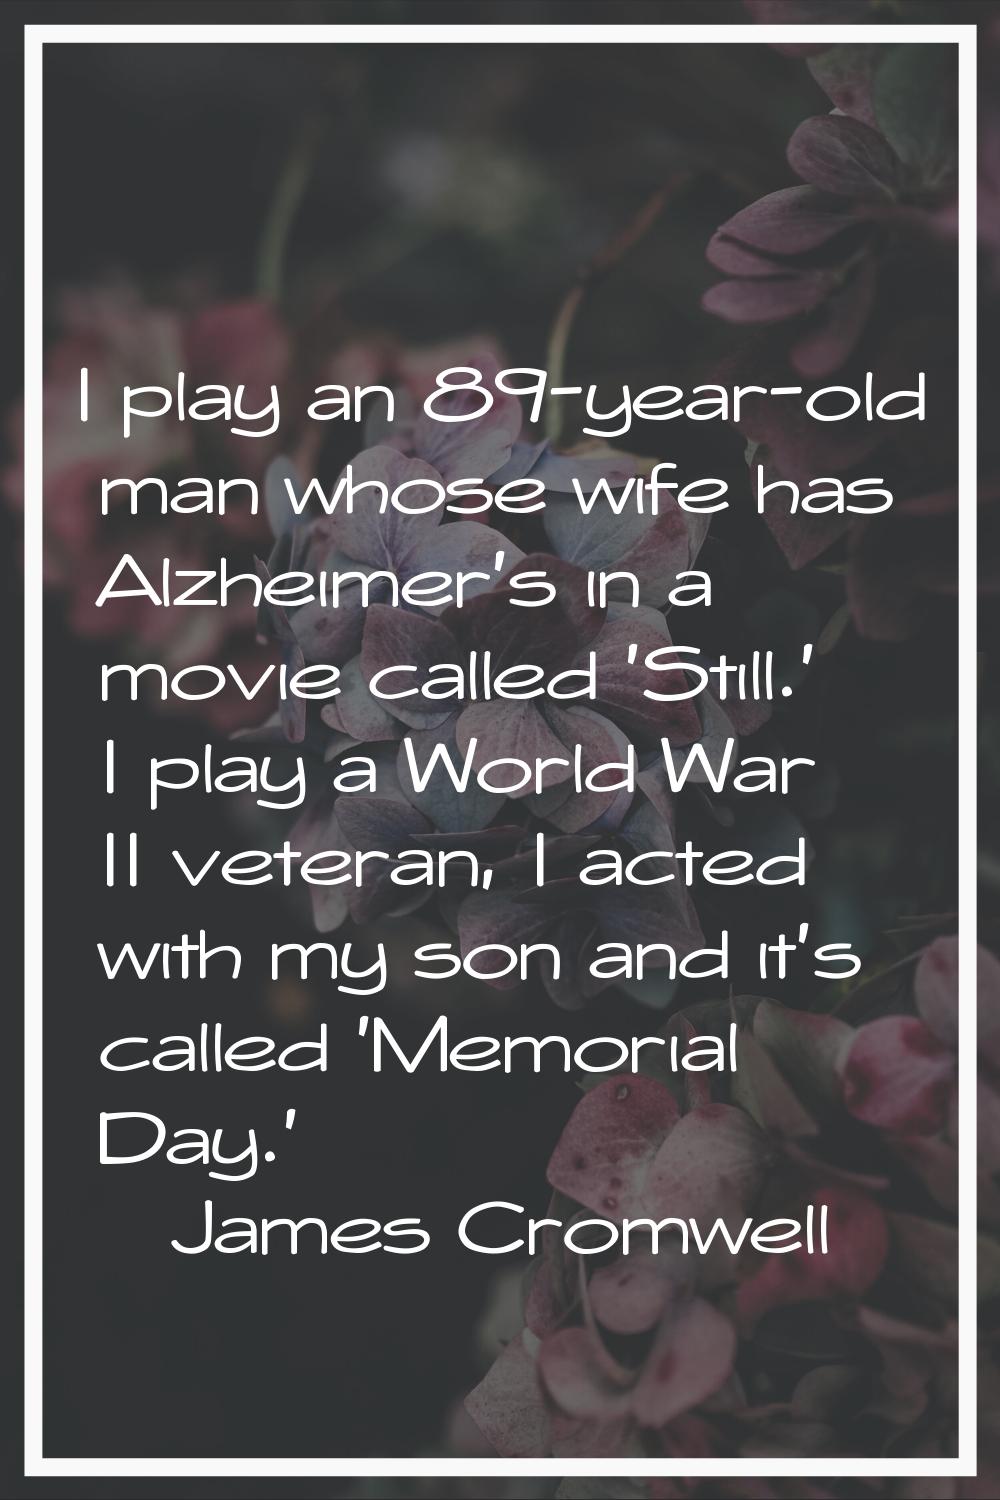 I play an 89-year-old man whose wife has Alzheimer's in a movie called 'Still.' I play a World War 